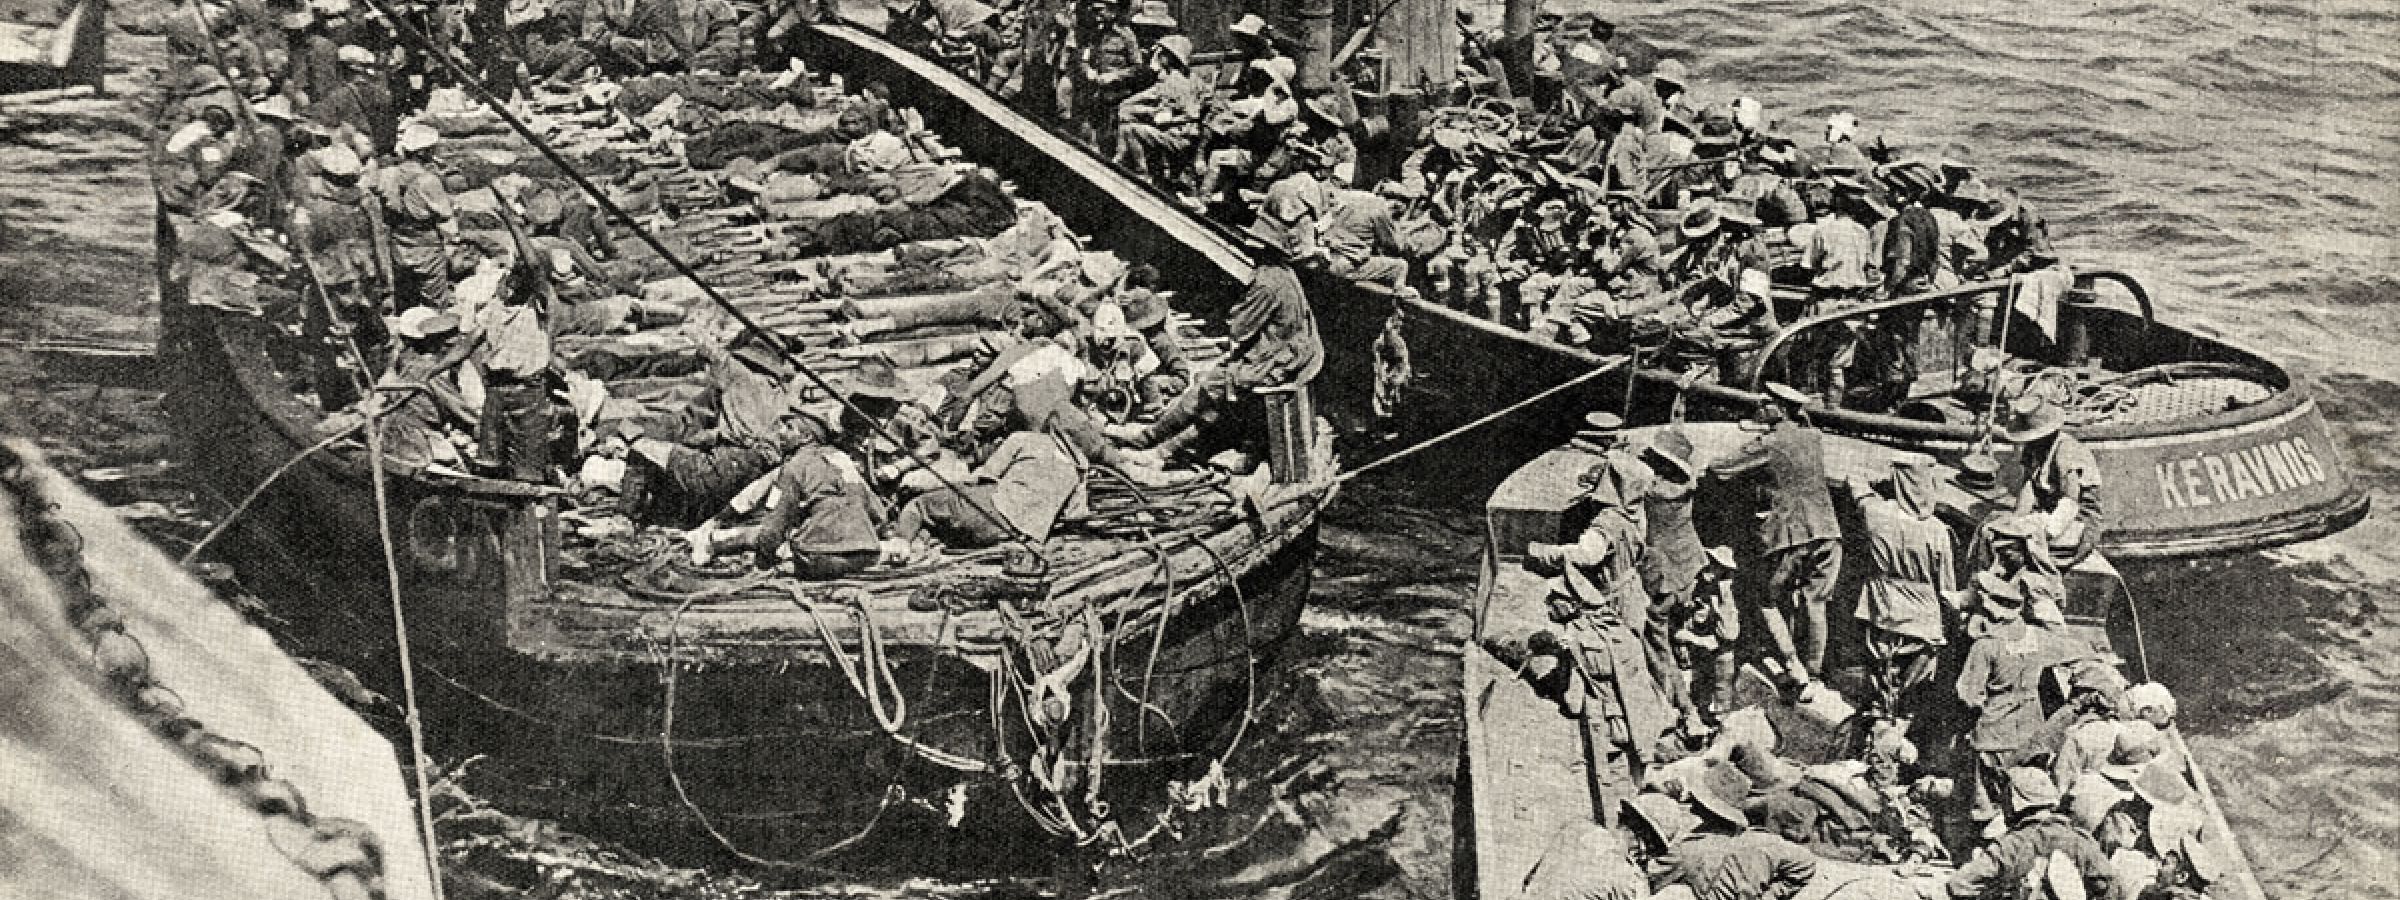 Wounded being brought along side an unidentified hospital ship off Gallipoli. A good view of the barges and the lighter towing them. There look to be a number of walking sick and wounded as well as stretcher cases